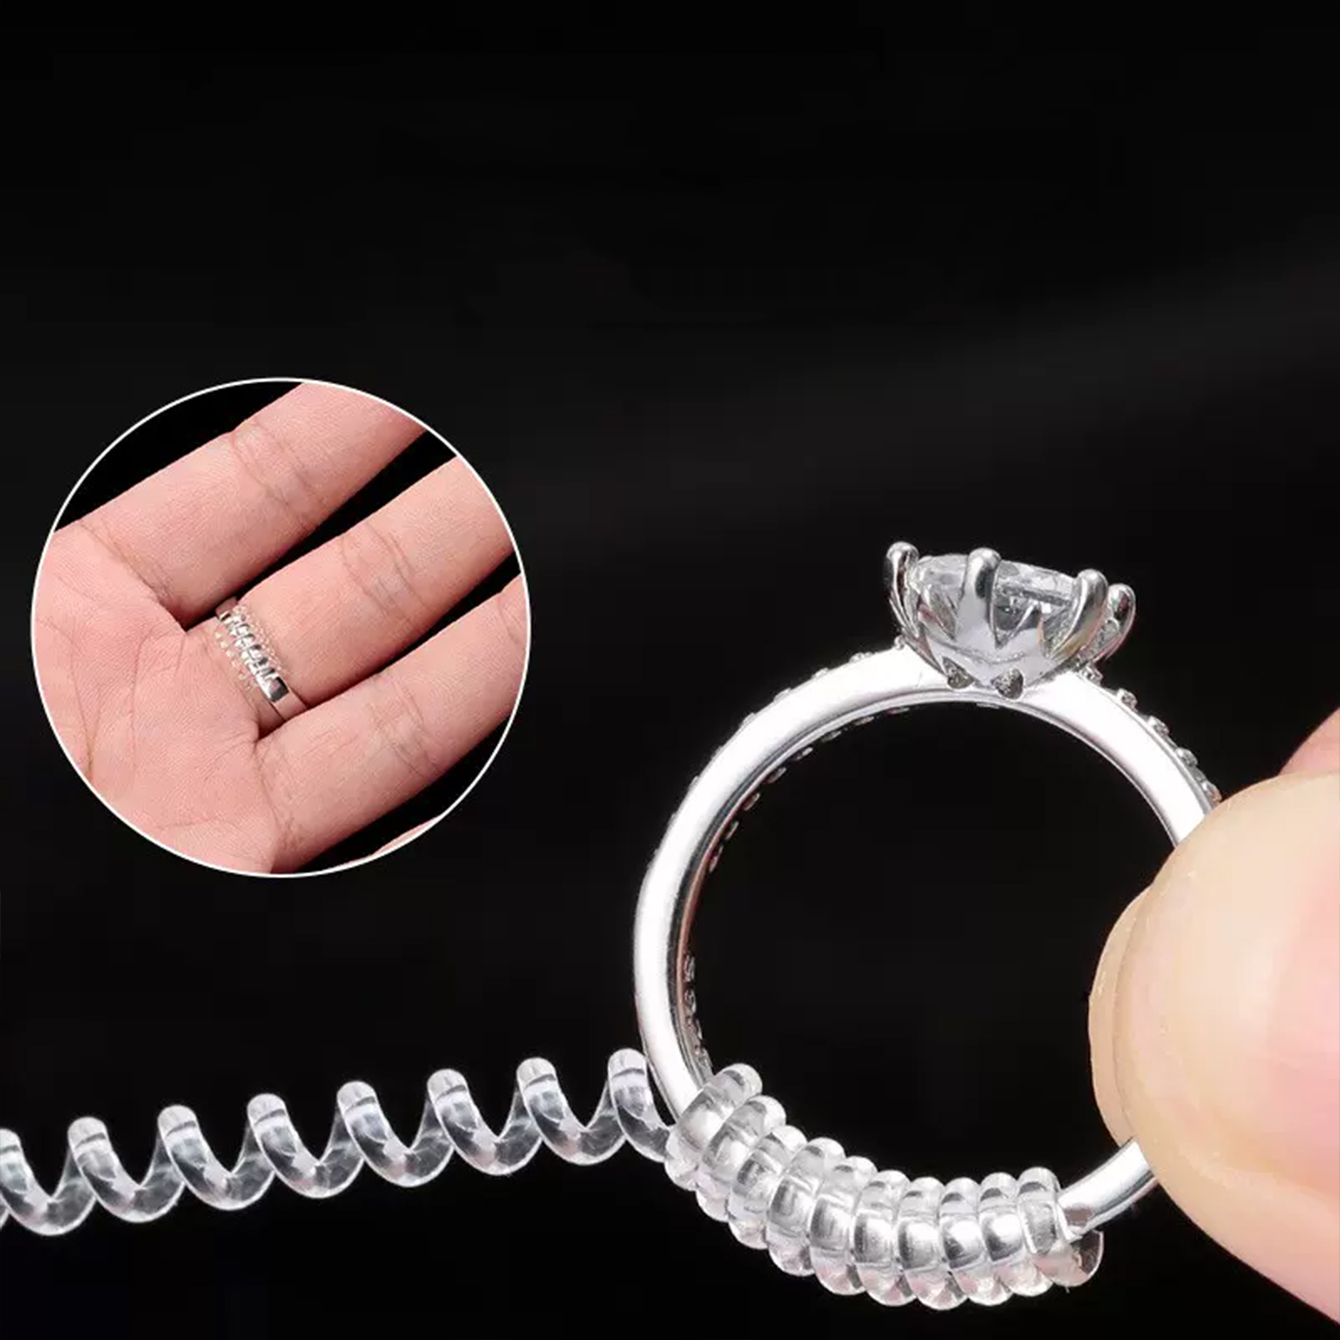 12pc/set Invisible Clear Ring Size Adjuster For Loose Rings / Transparent  Ring Sizer With 2-10mm Sizes / High Quality Jewelry Fit Reducer Guard  (baifu | Fruugo NO